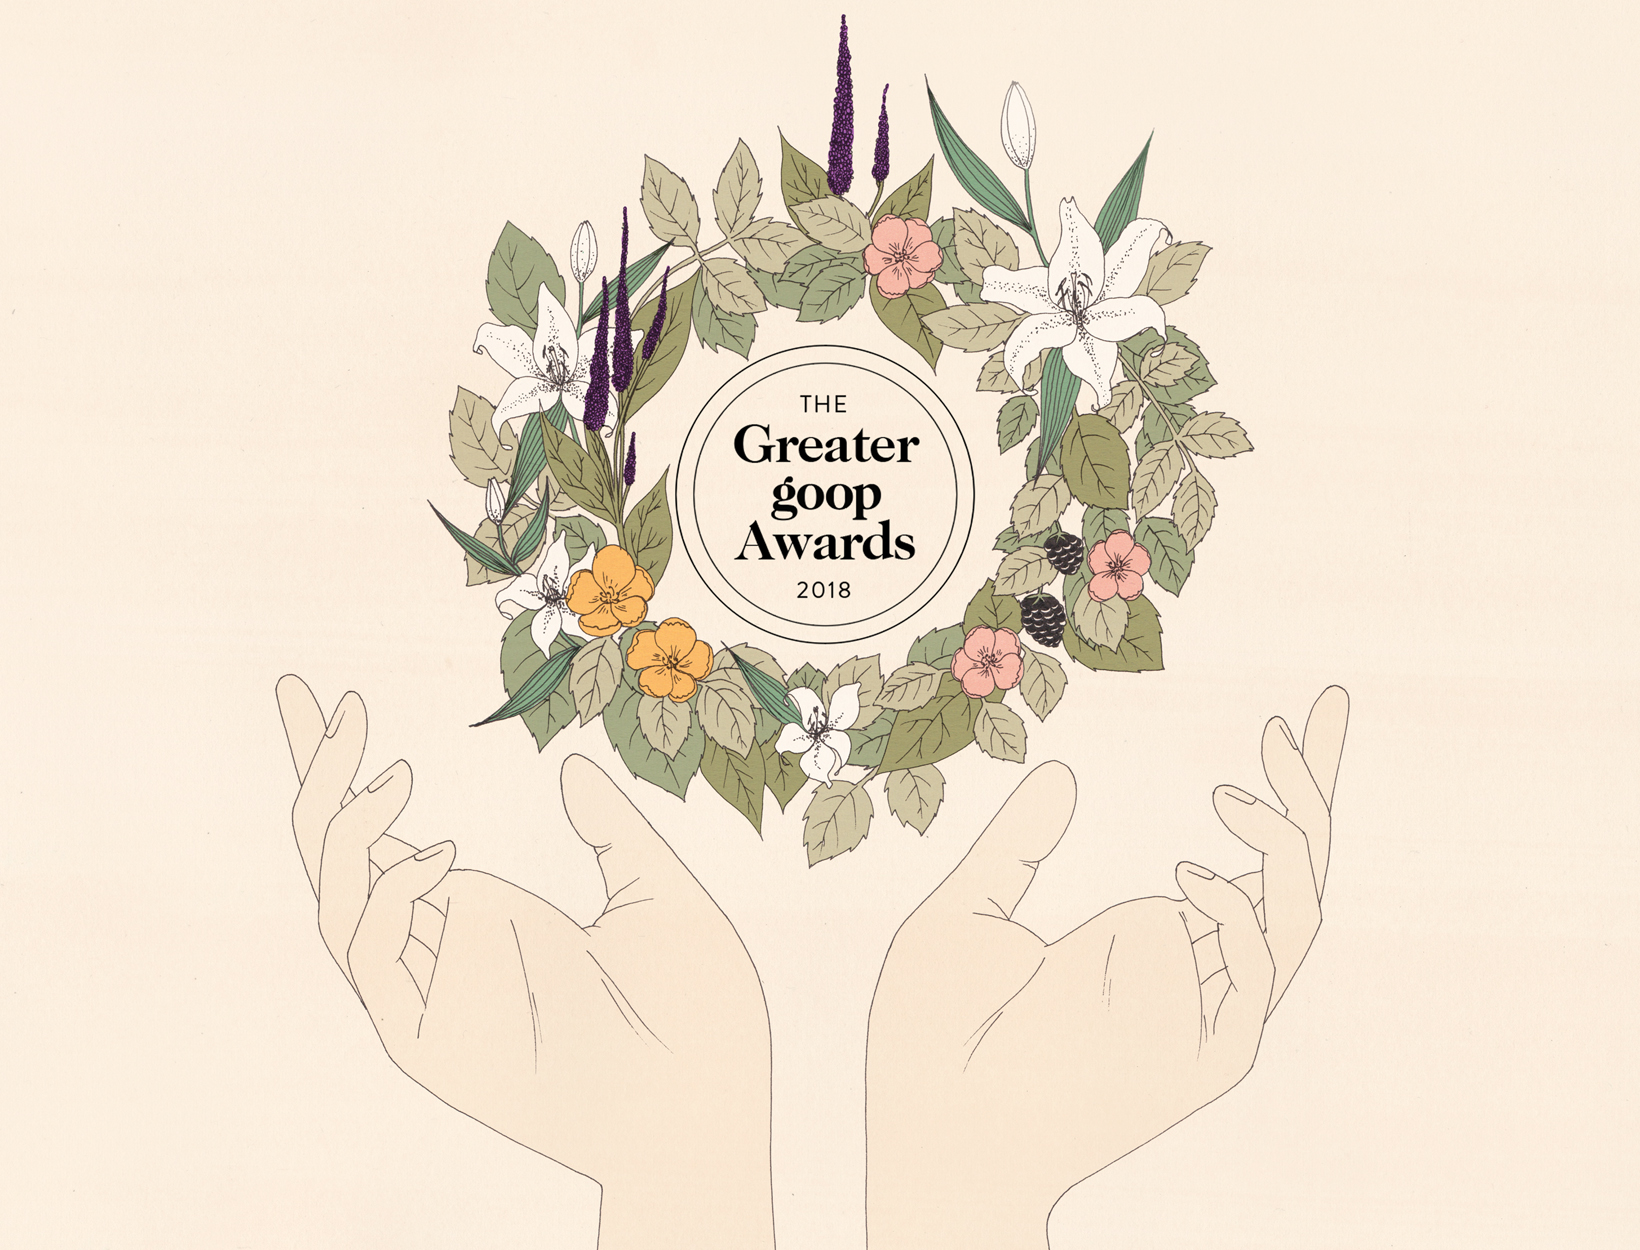 The Greater Goop Awards 2018